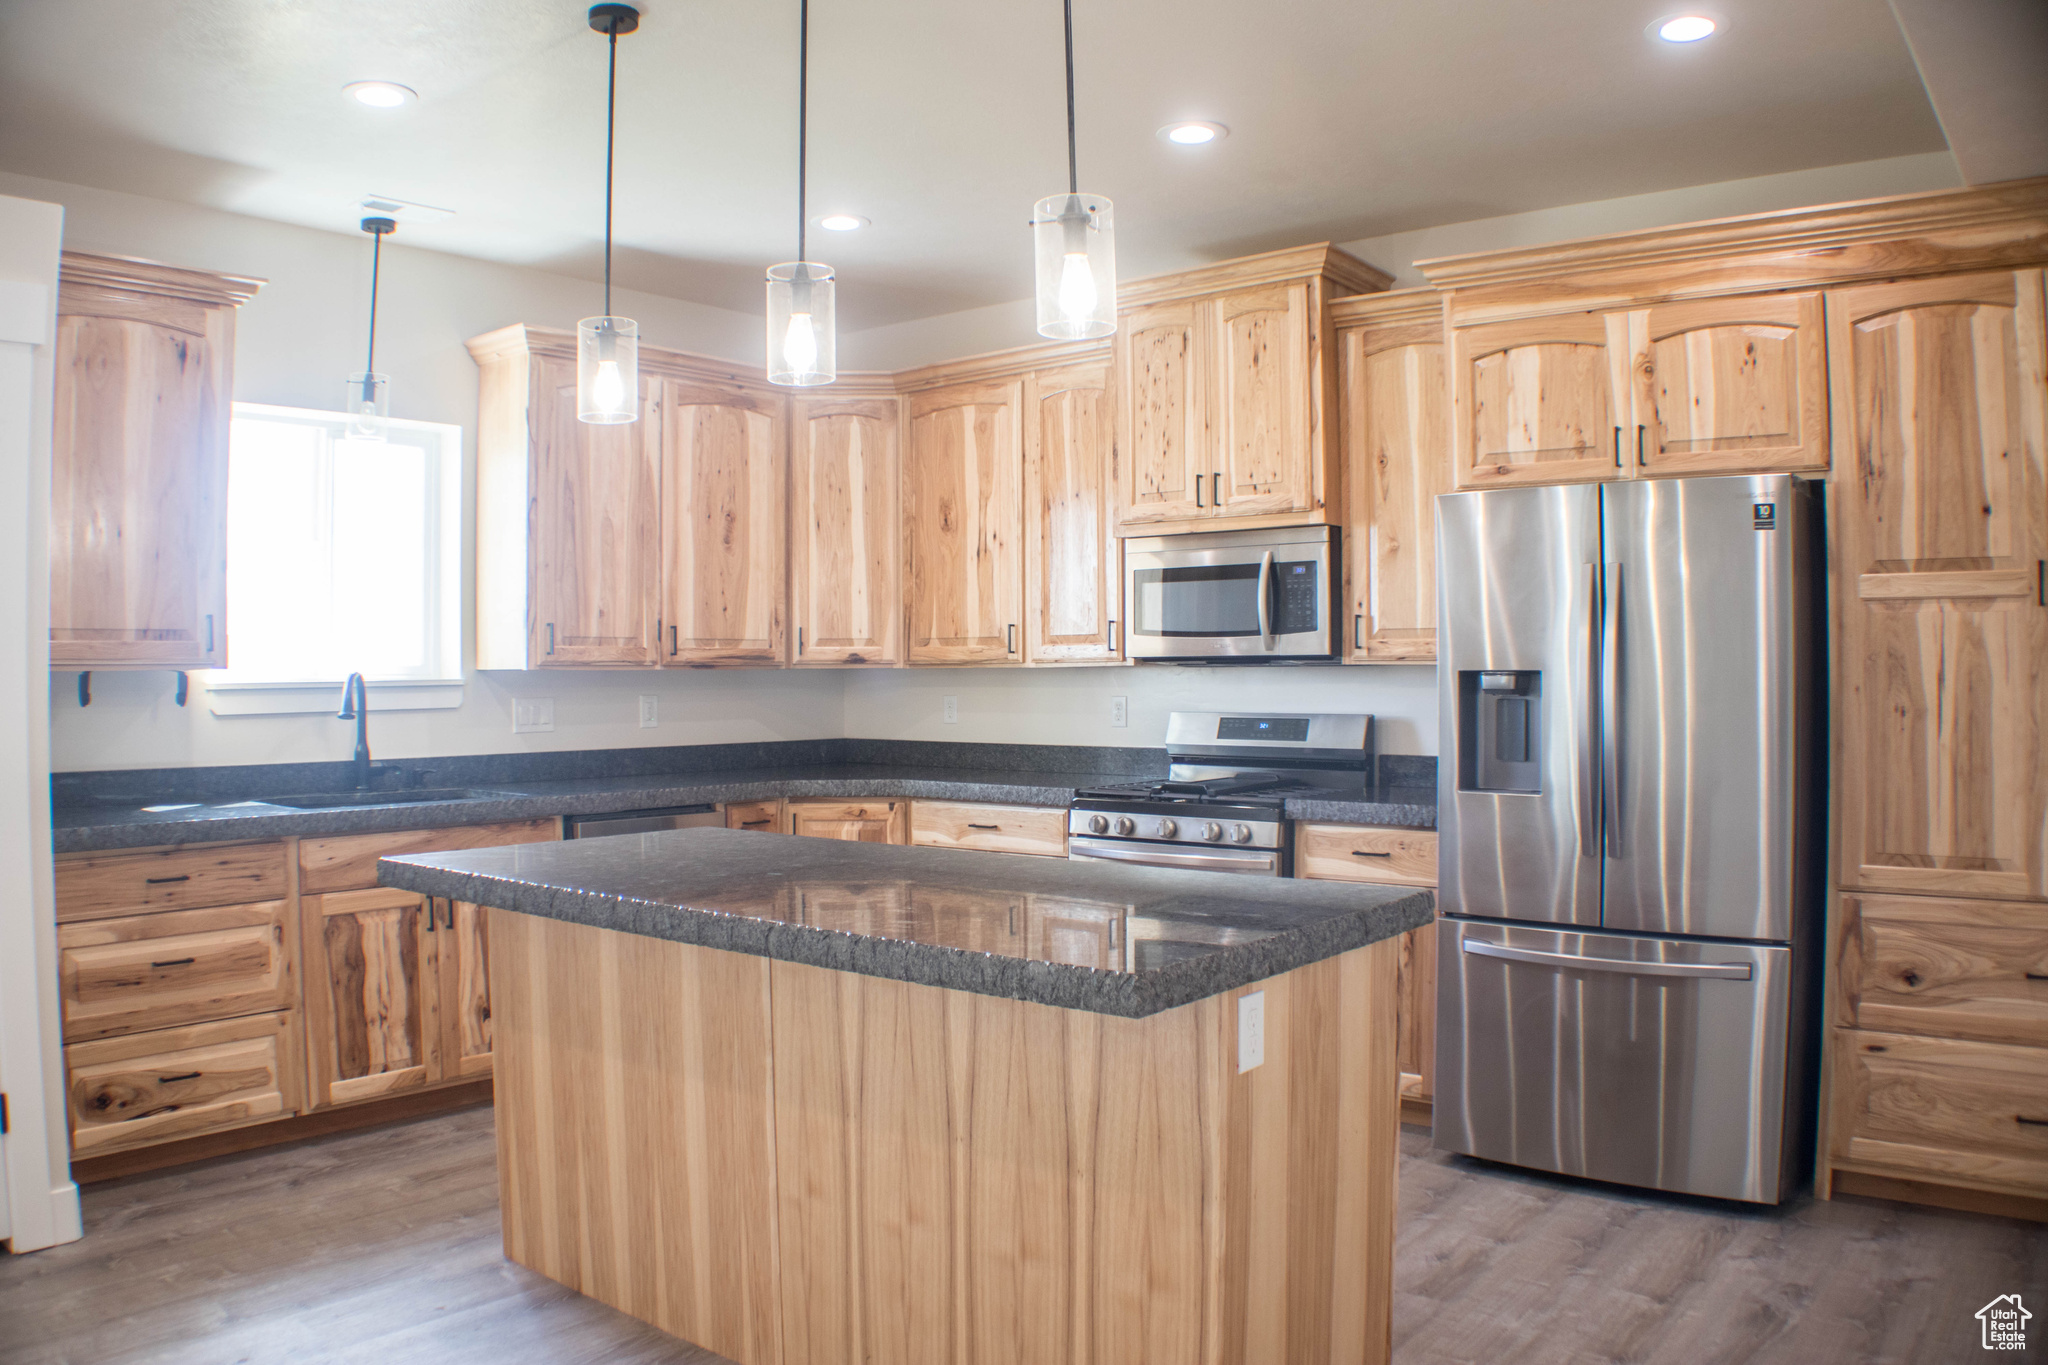 Kitchen featuring appliances with stainless steel finishes, a center island, sink, hardwood / wood-style floors, and hanging light fixtures